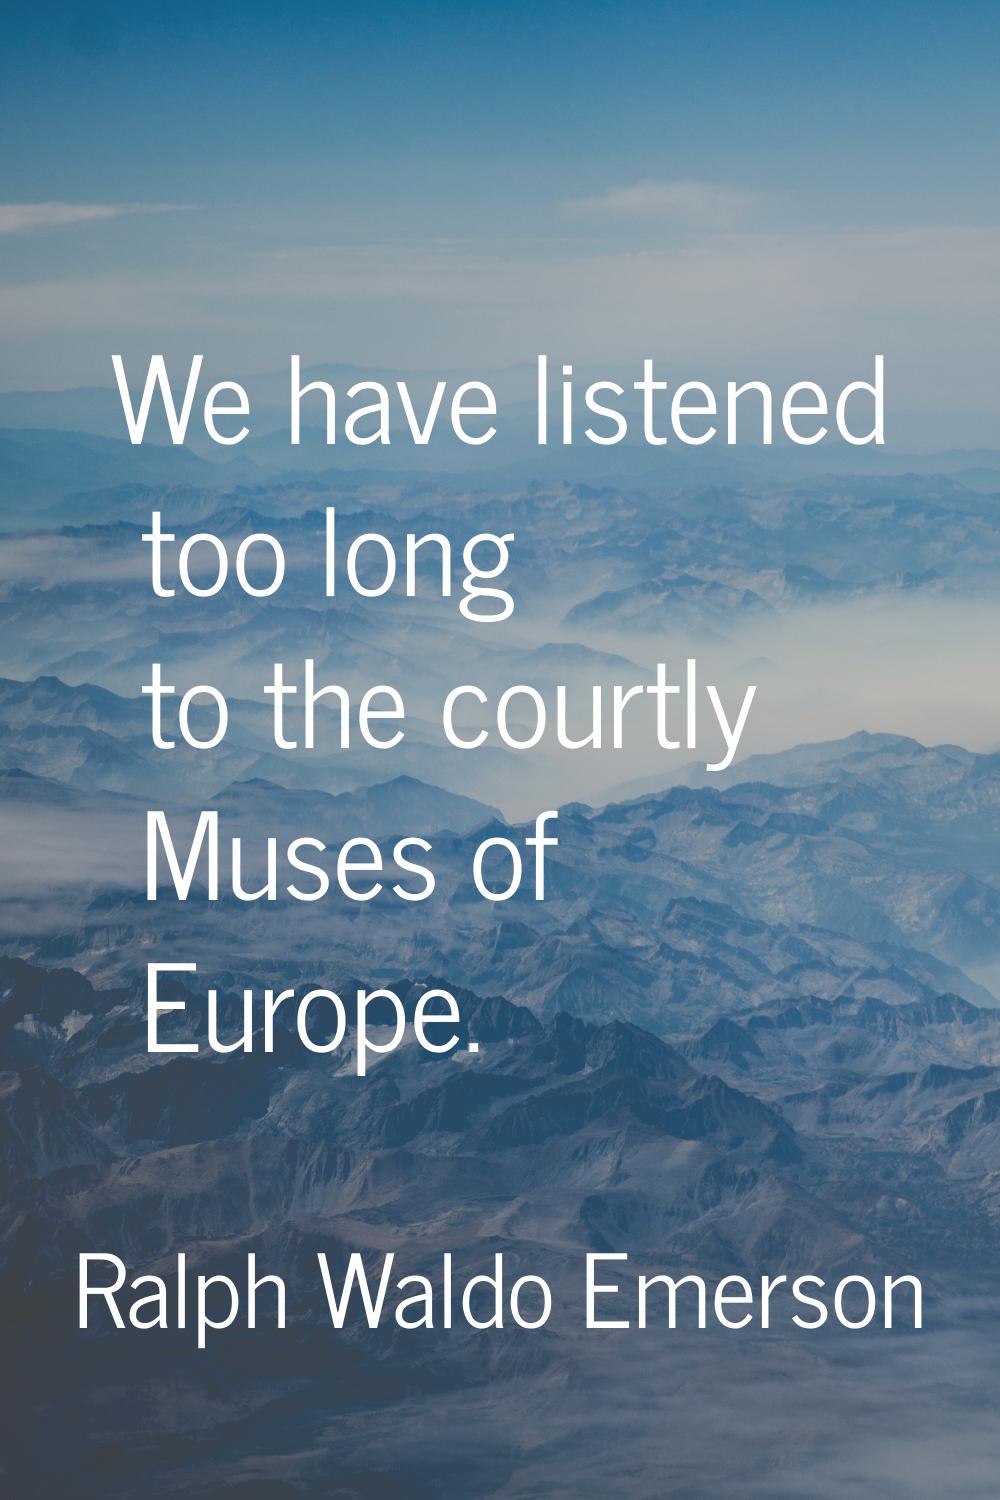 We have listened too long to the courtly Muses of Europe.